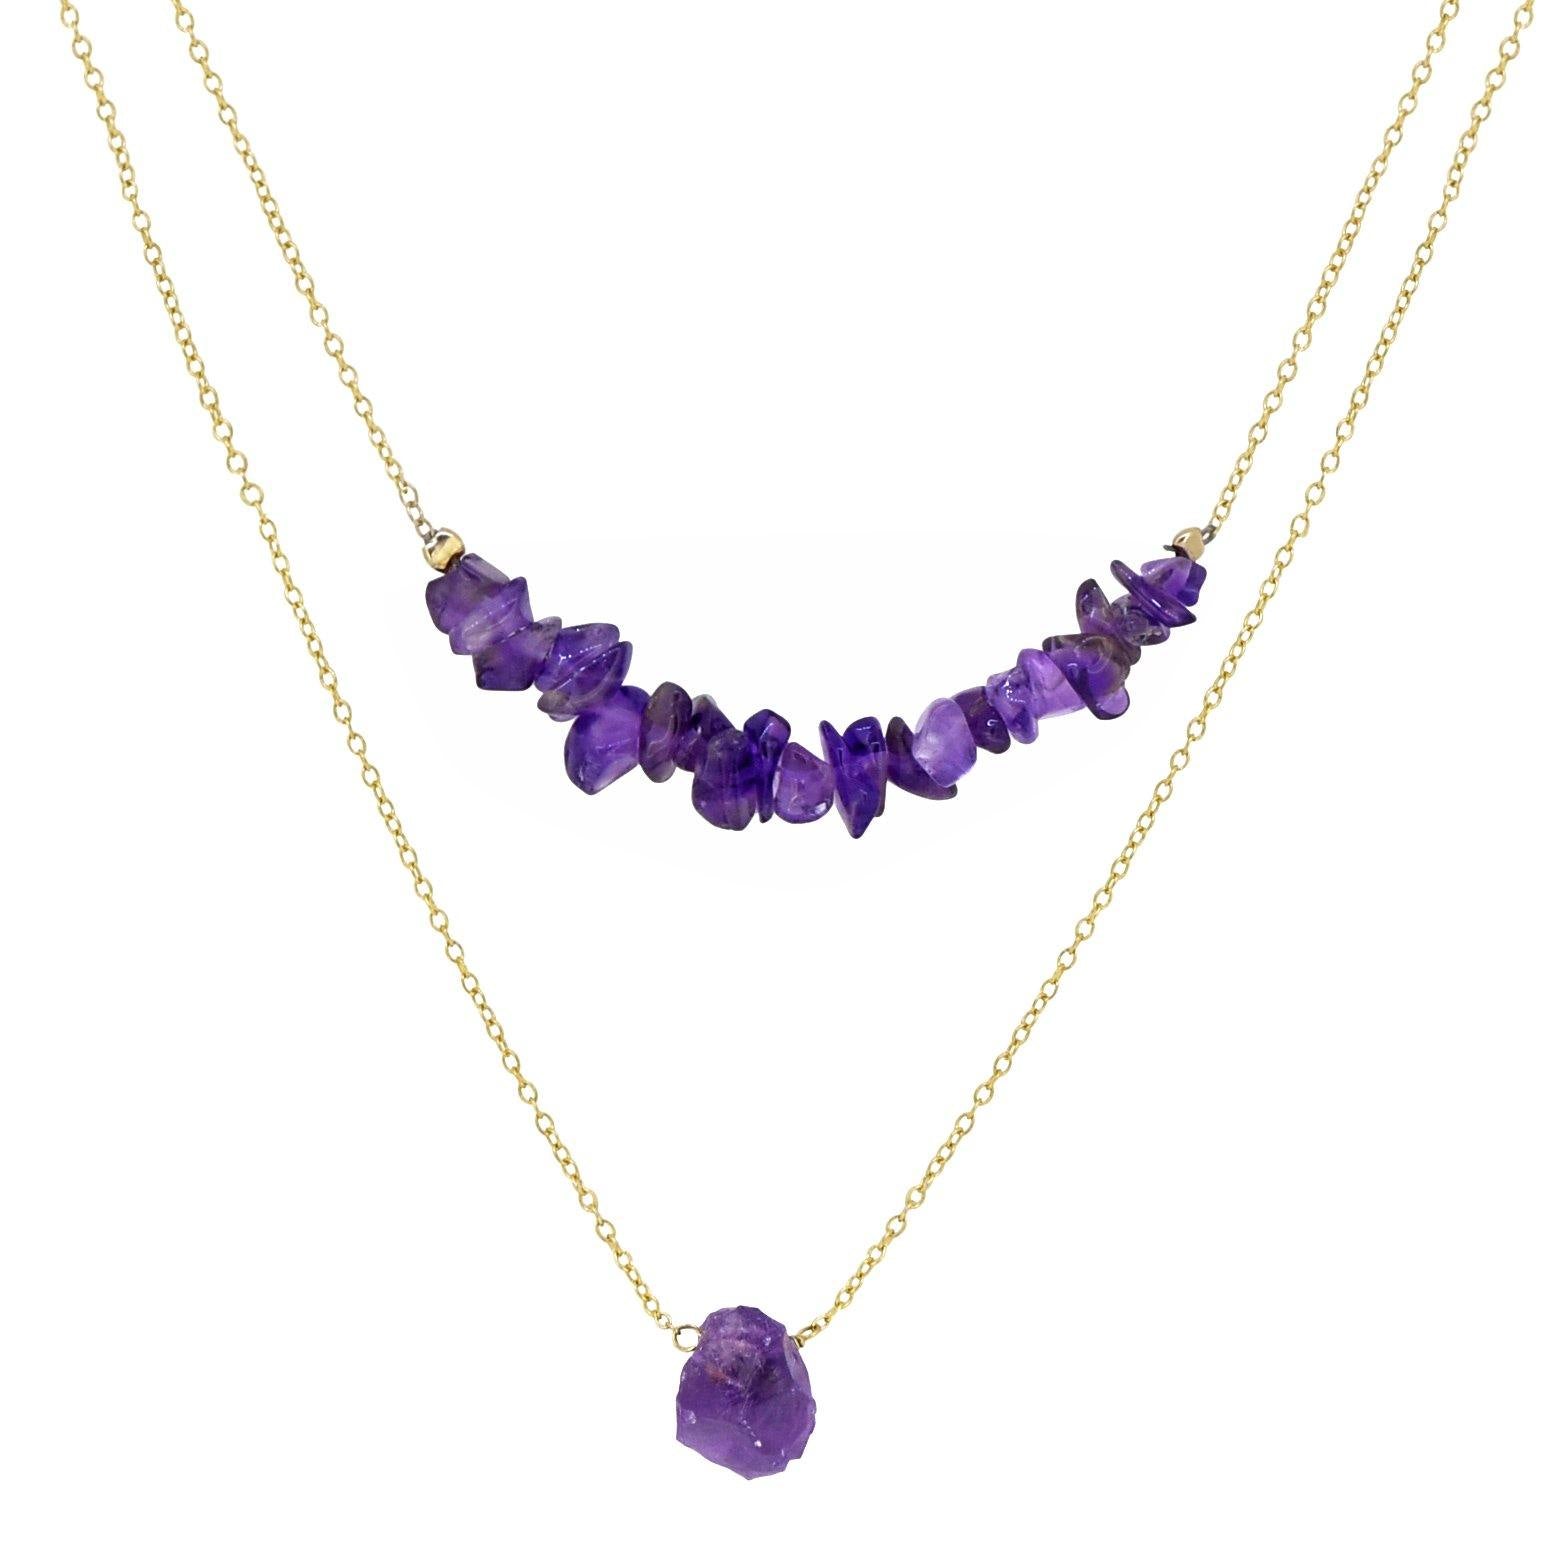 Amethyst Solid 925 Sterling Silver Gold Plated Double Layer Chain Pendant Necklace Jewelry - YoTreasure